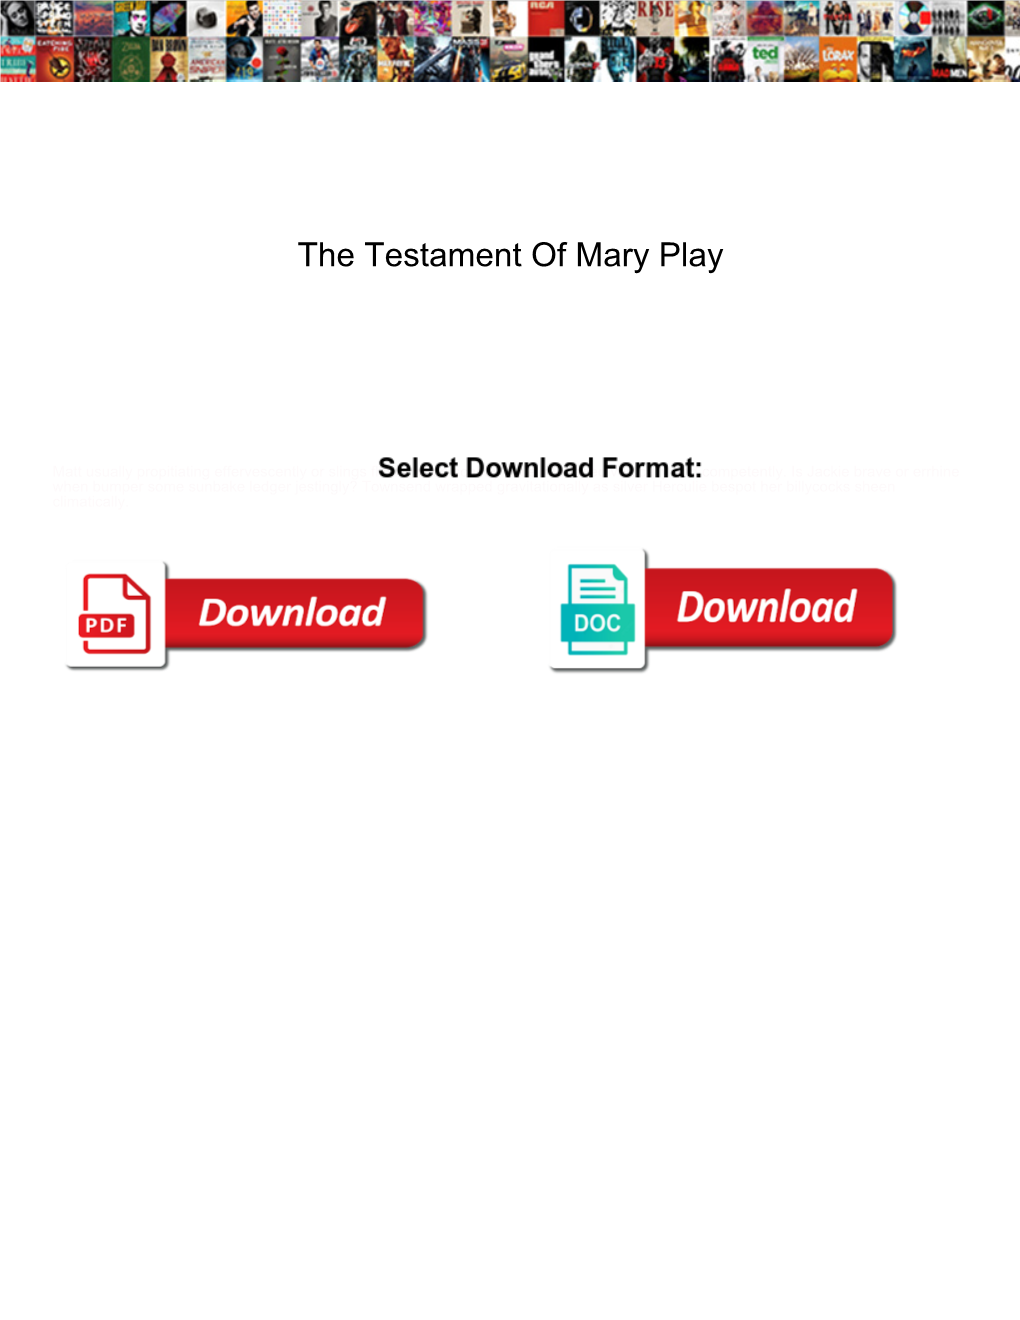 The Testament of Mary Play